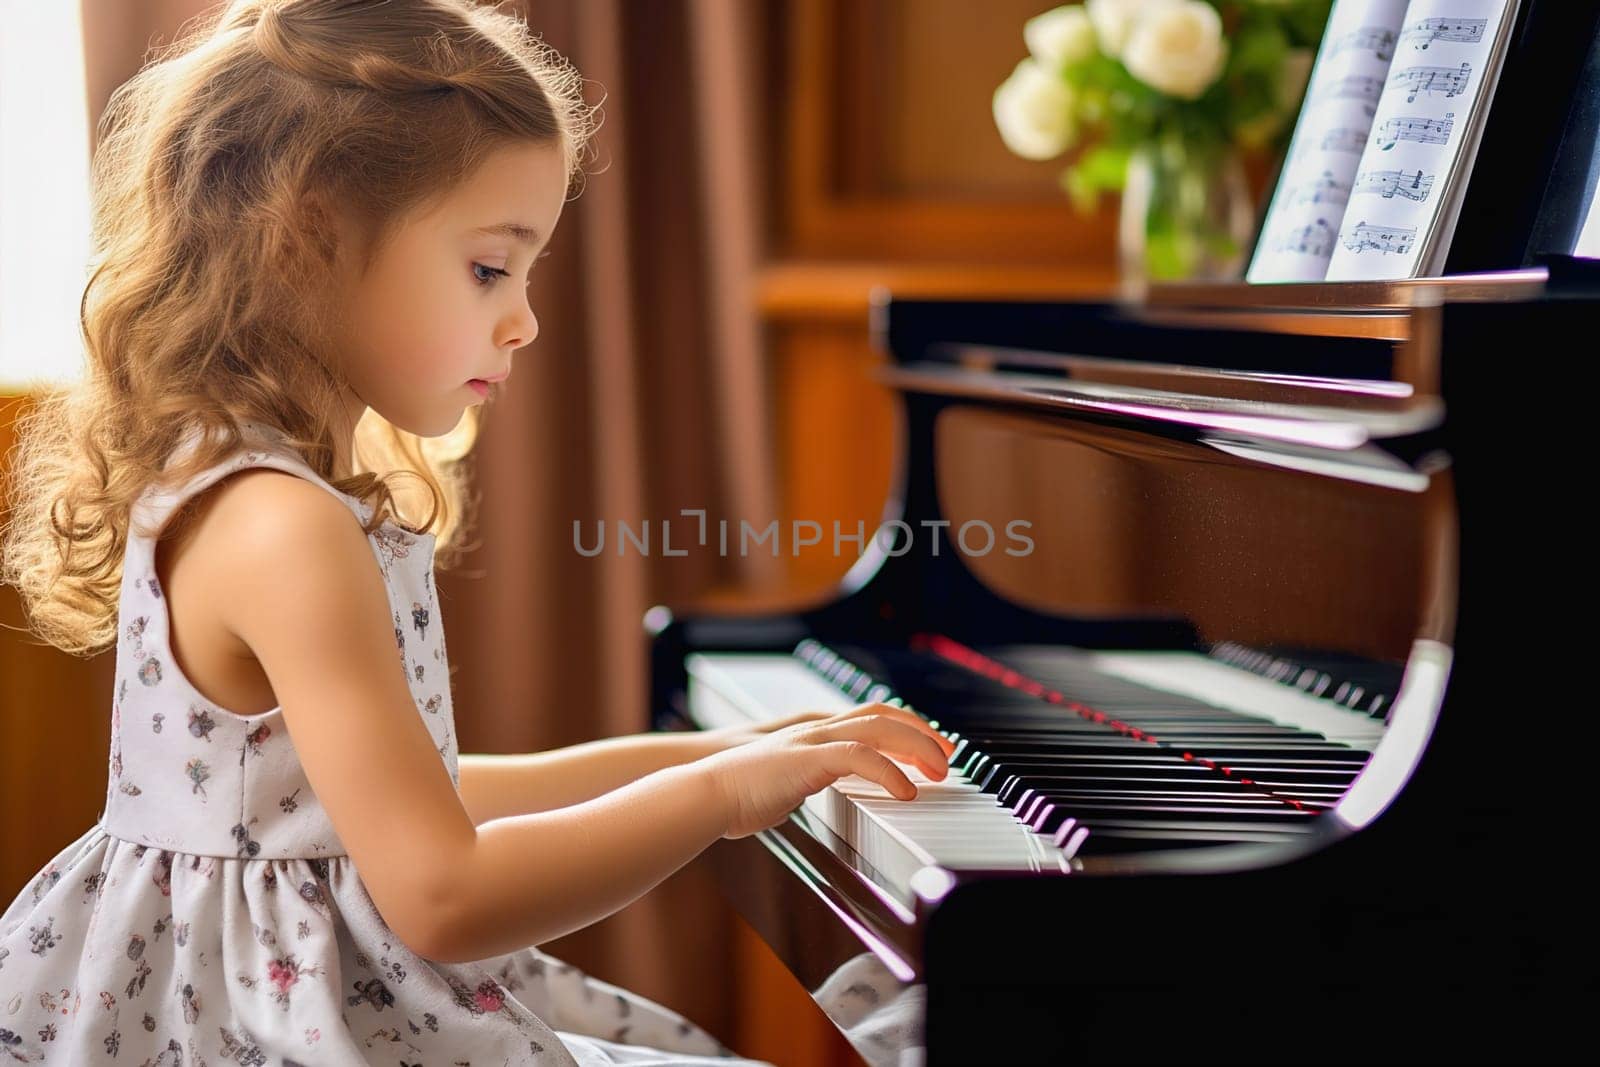 A little girl with long hair is learning to play the piano. by Yurich32